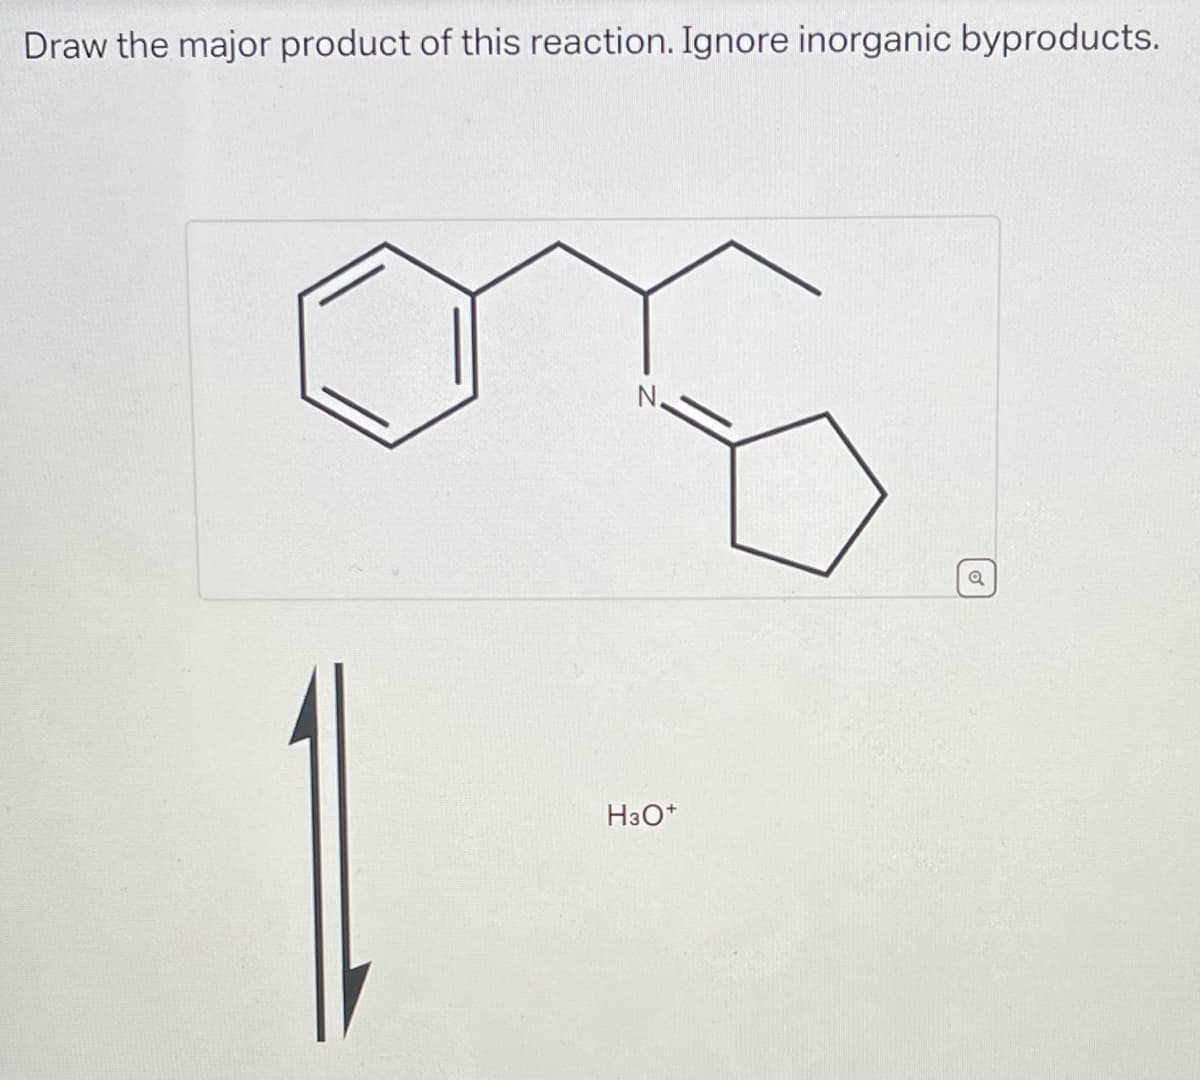 Draw the major product of this reaction. Ignore inorganic byproducts.
H3O+
Q